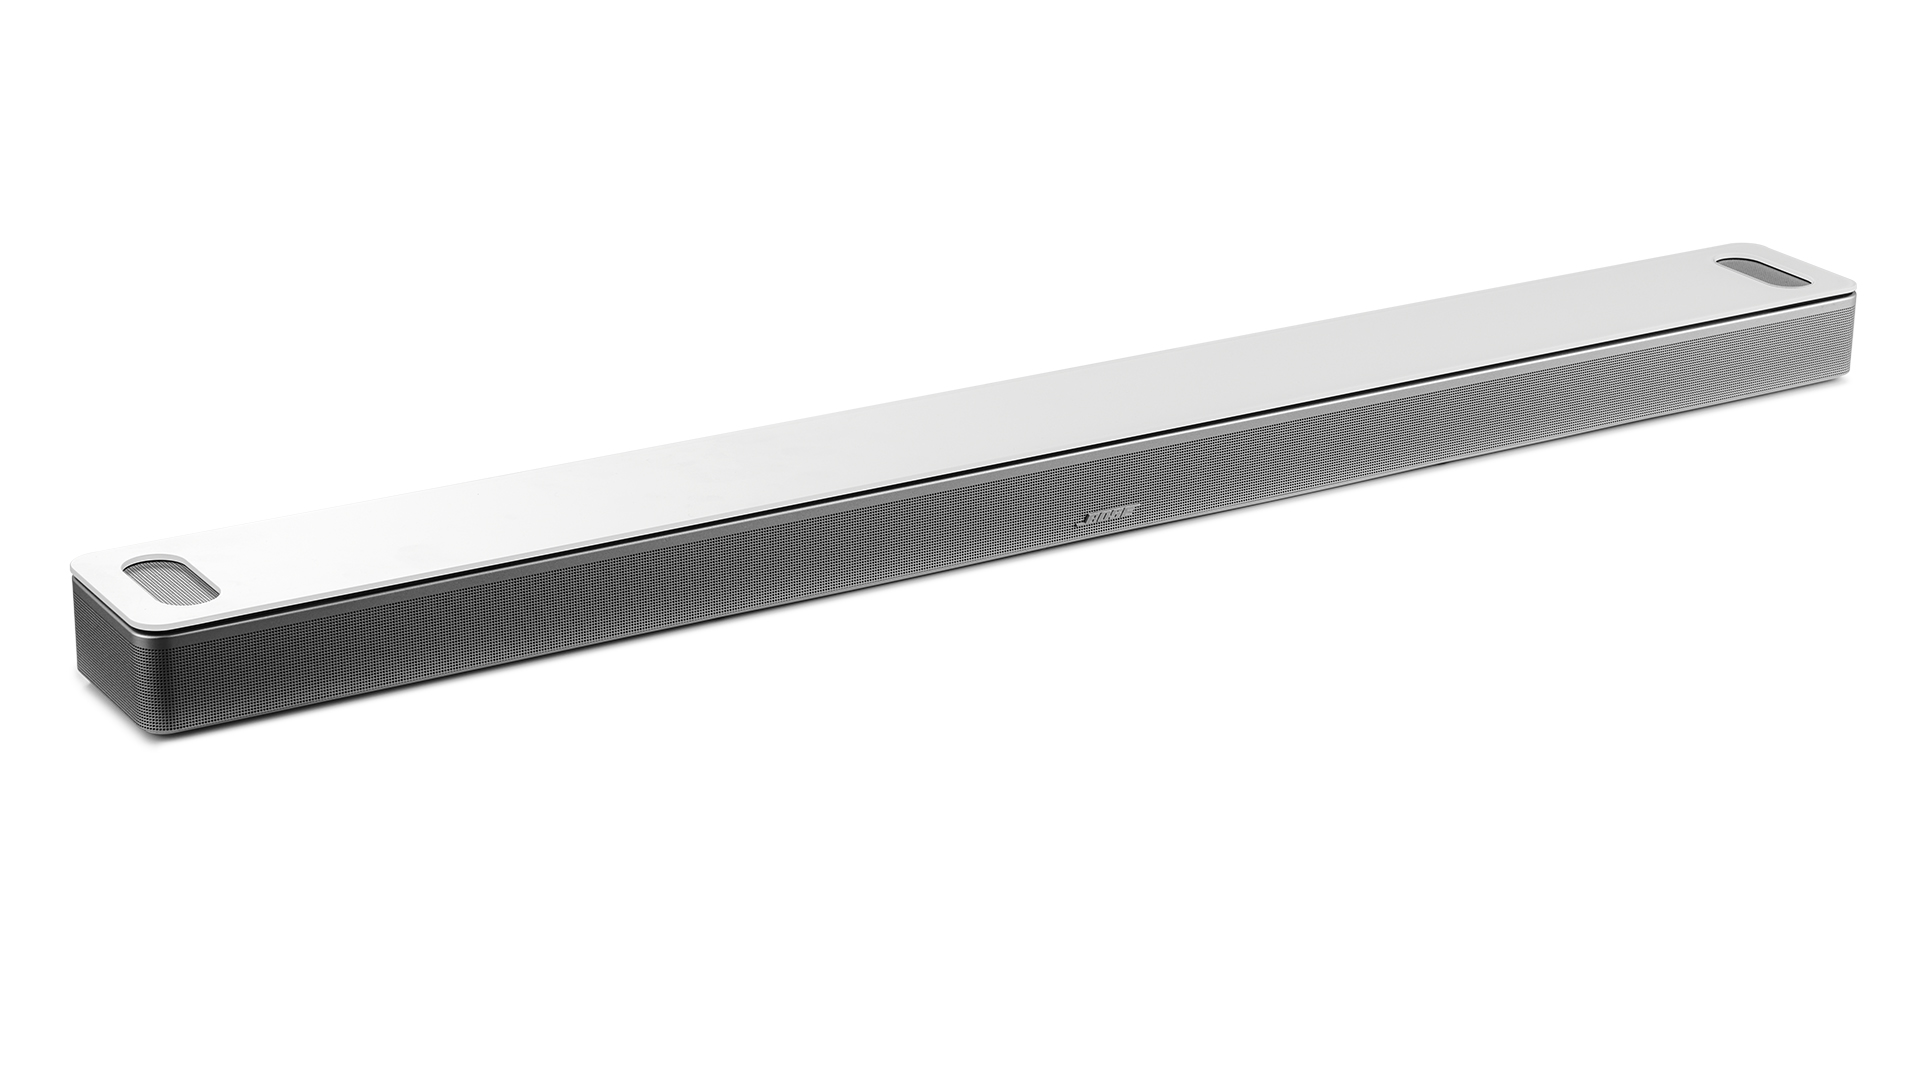 Bose Smart Soundbar 900 with Speakers + Bass Module Review